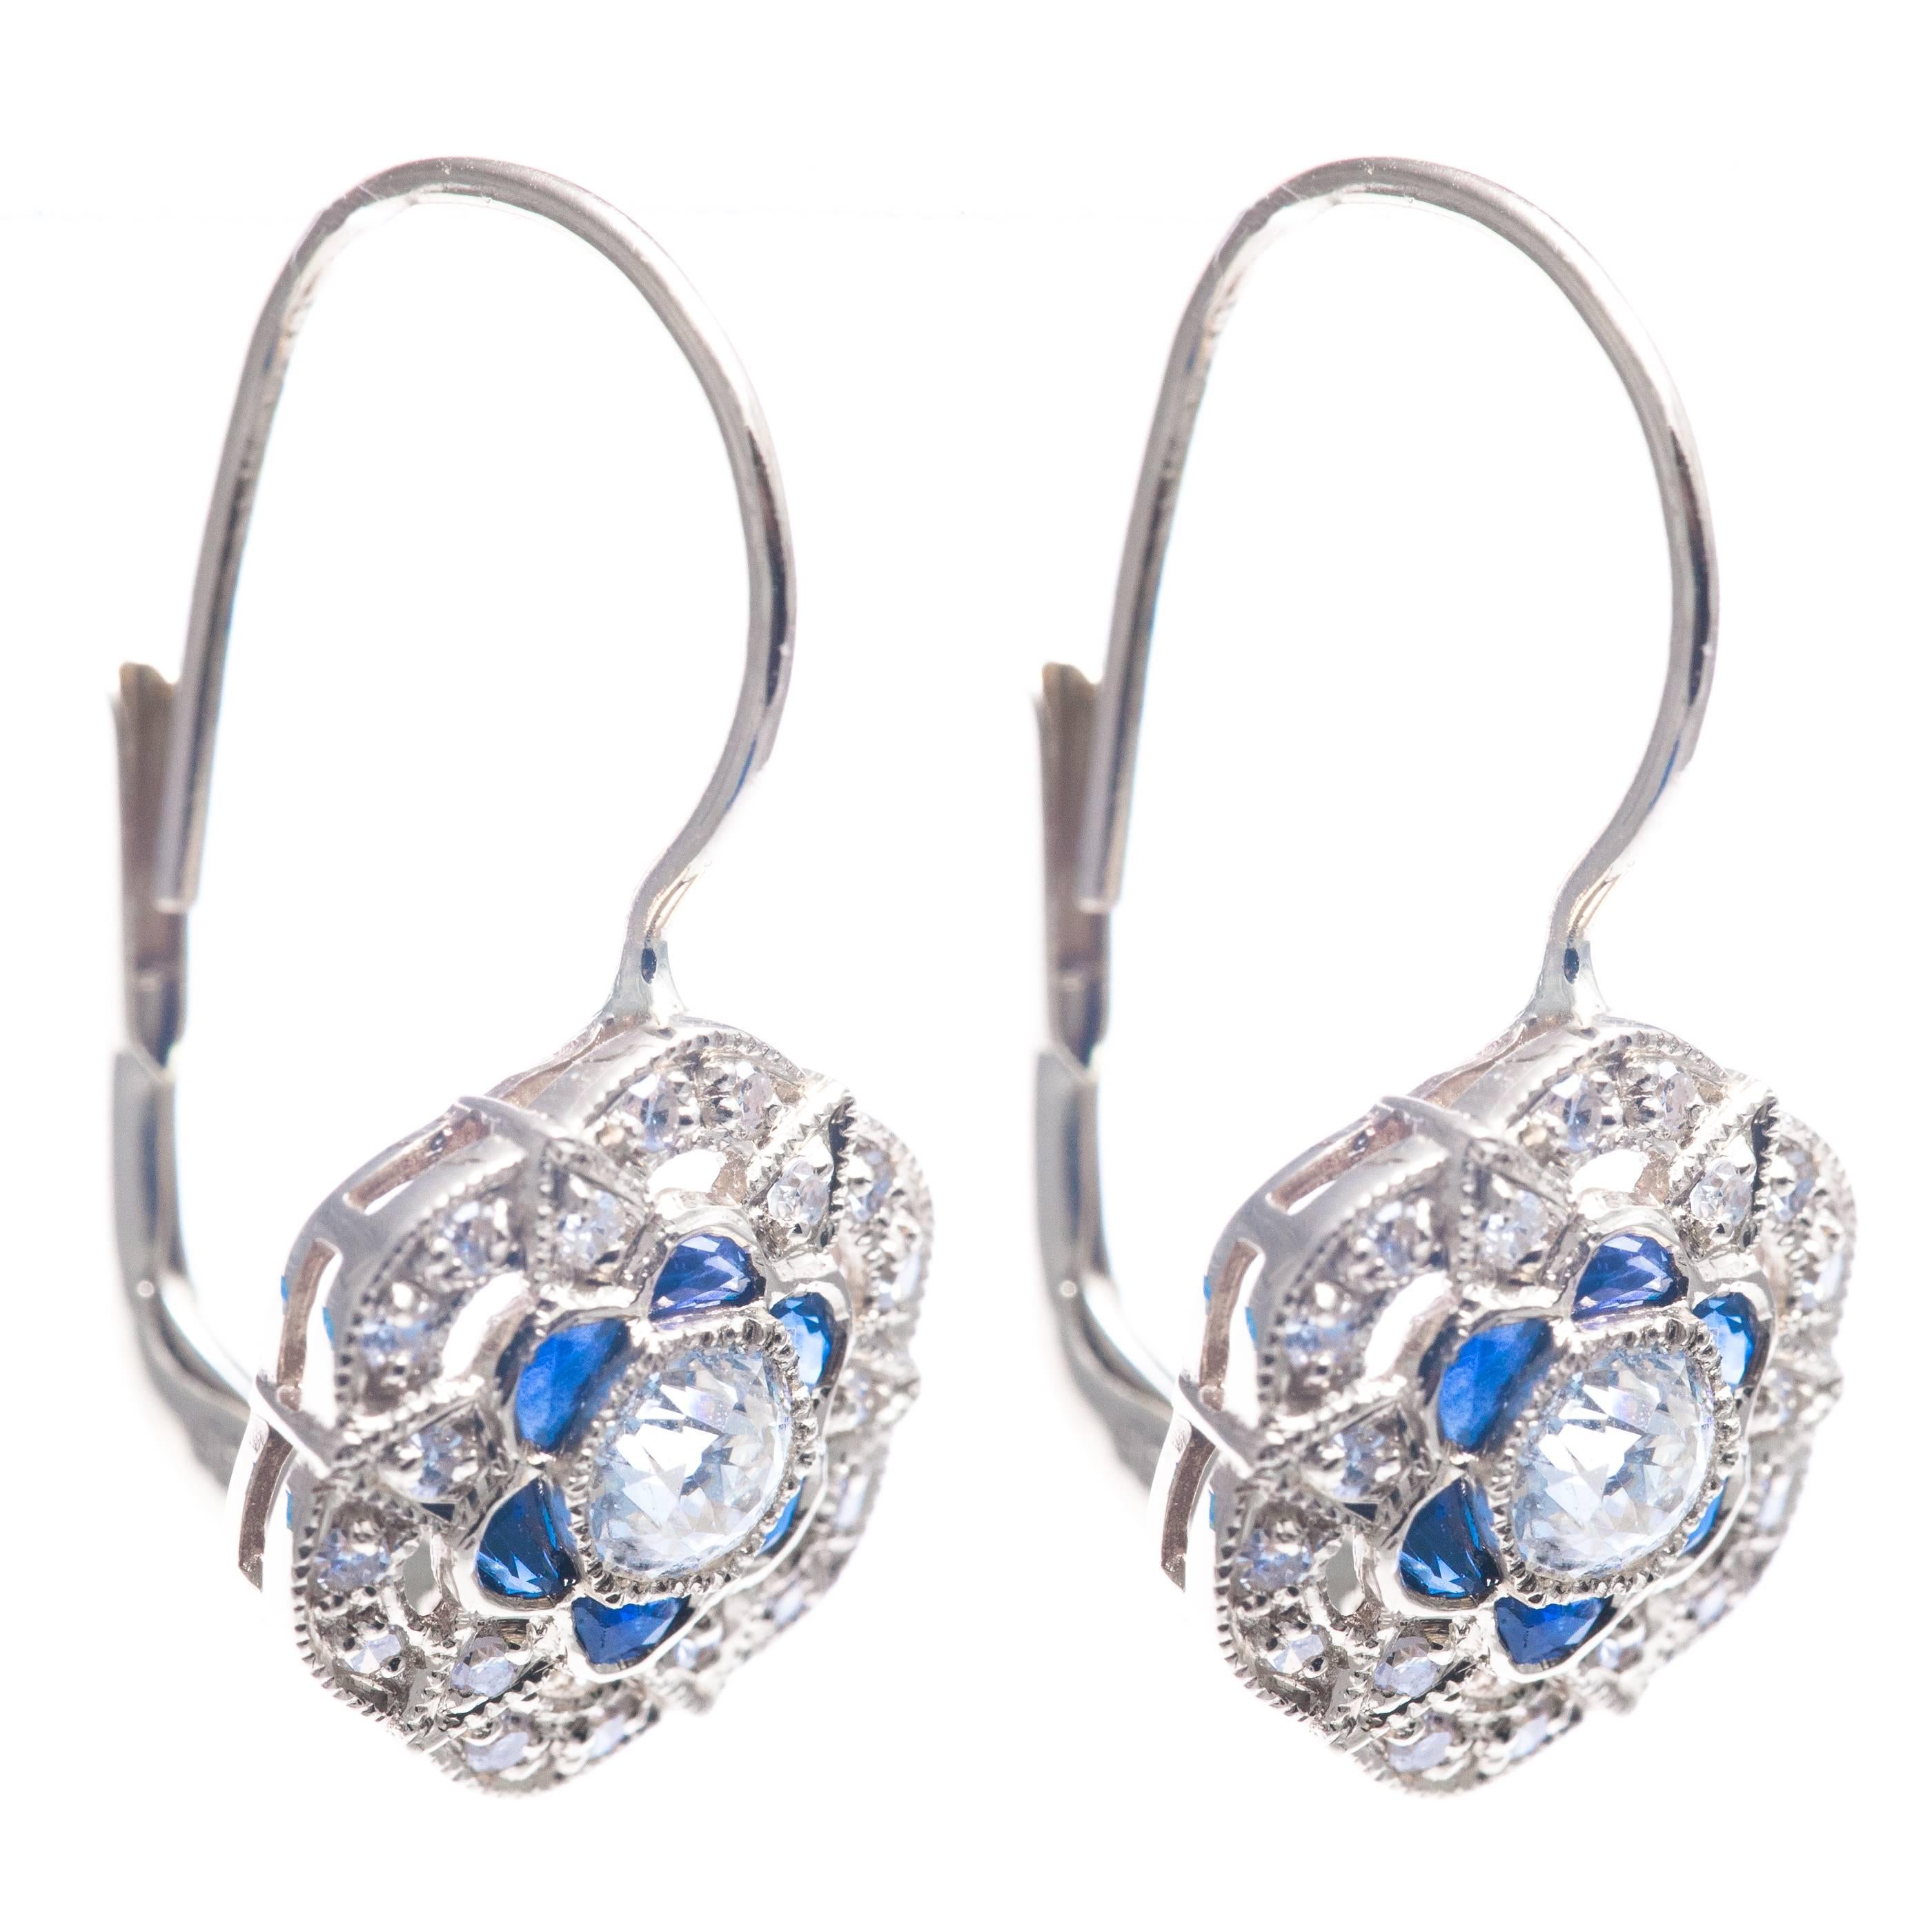 A beautiful pair of diamond and sapphire flower motif earrings in 14 karat white gold.  Centered by bezel set antique European cut diamond these earrings feature bespoke sapphire petals and are accented by a plethora of pave set diamonds.

Of